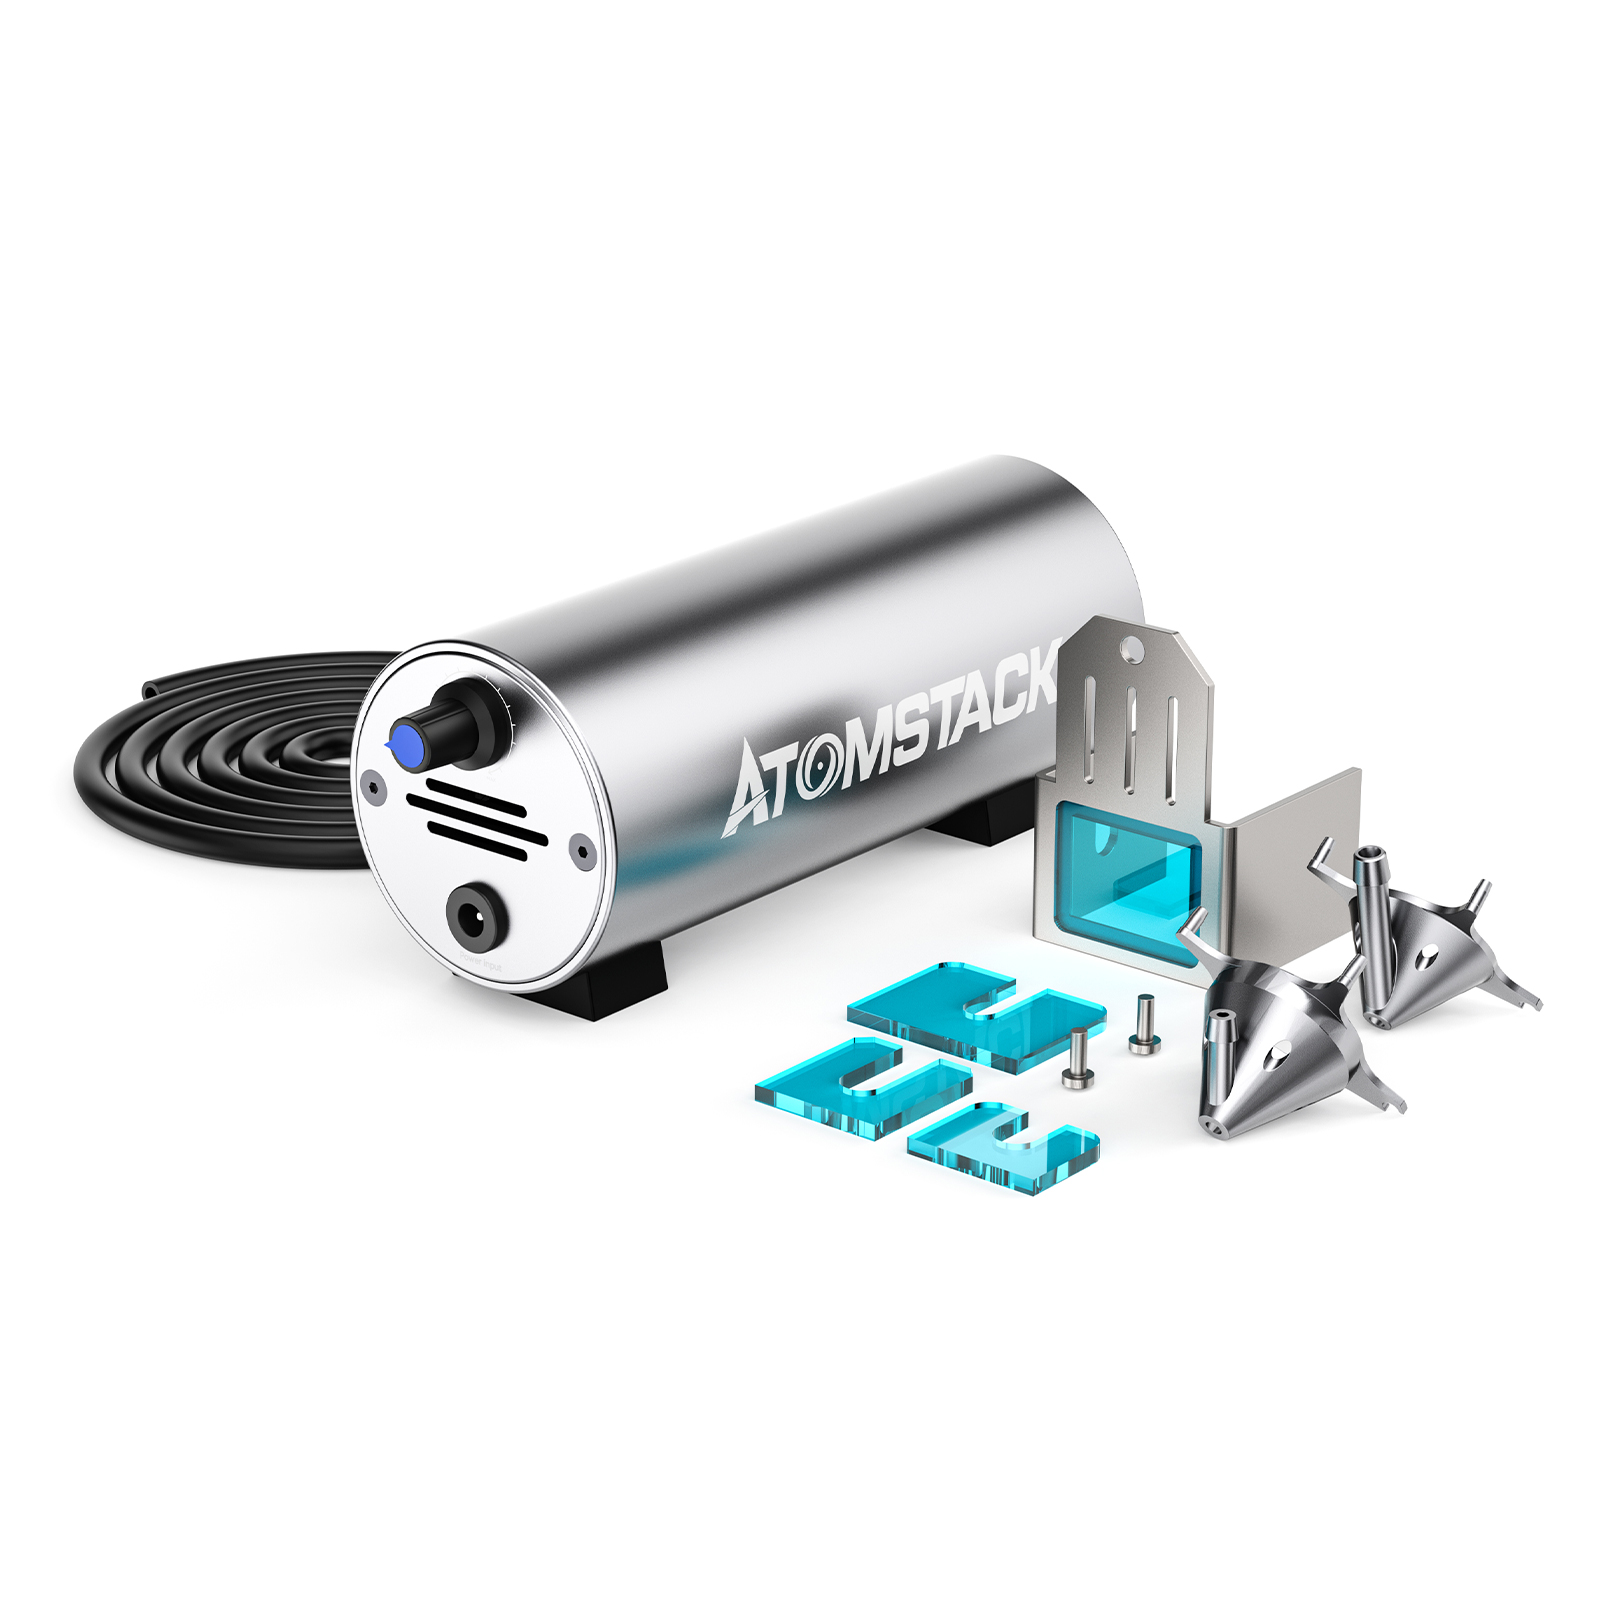 56€ with Coupon for Atomstack Air Assist System for Laser Engraving Machine - EU 🇪🇺 - BANGGOOD